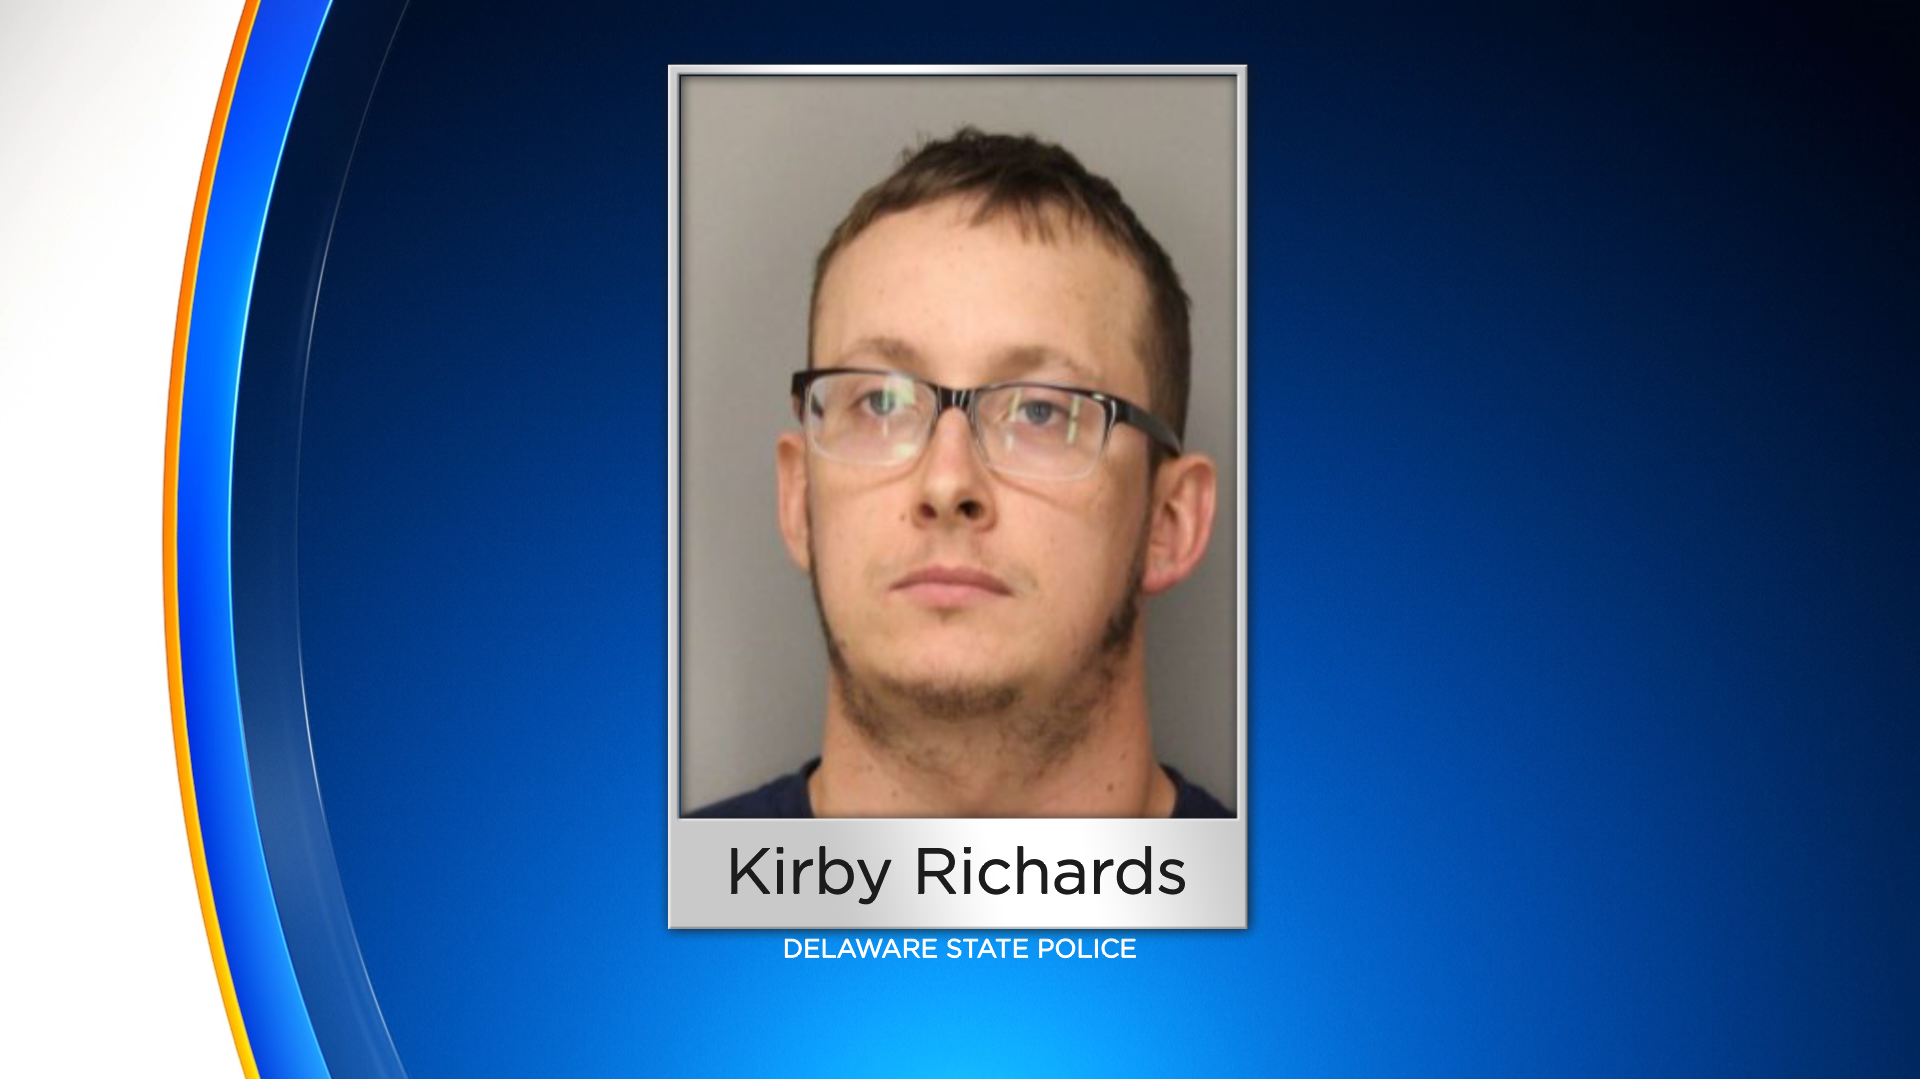 Michigan Man Arrested On Weapons-Related Charges After Firing Gun At Vehicle On Interstate 295 In Delaware: Police